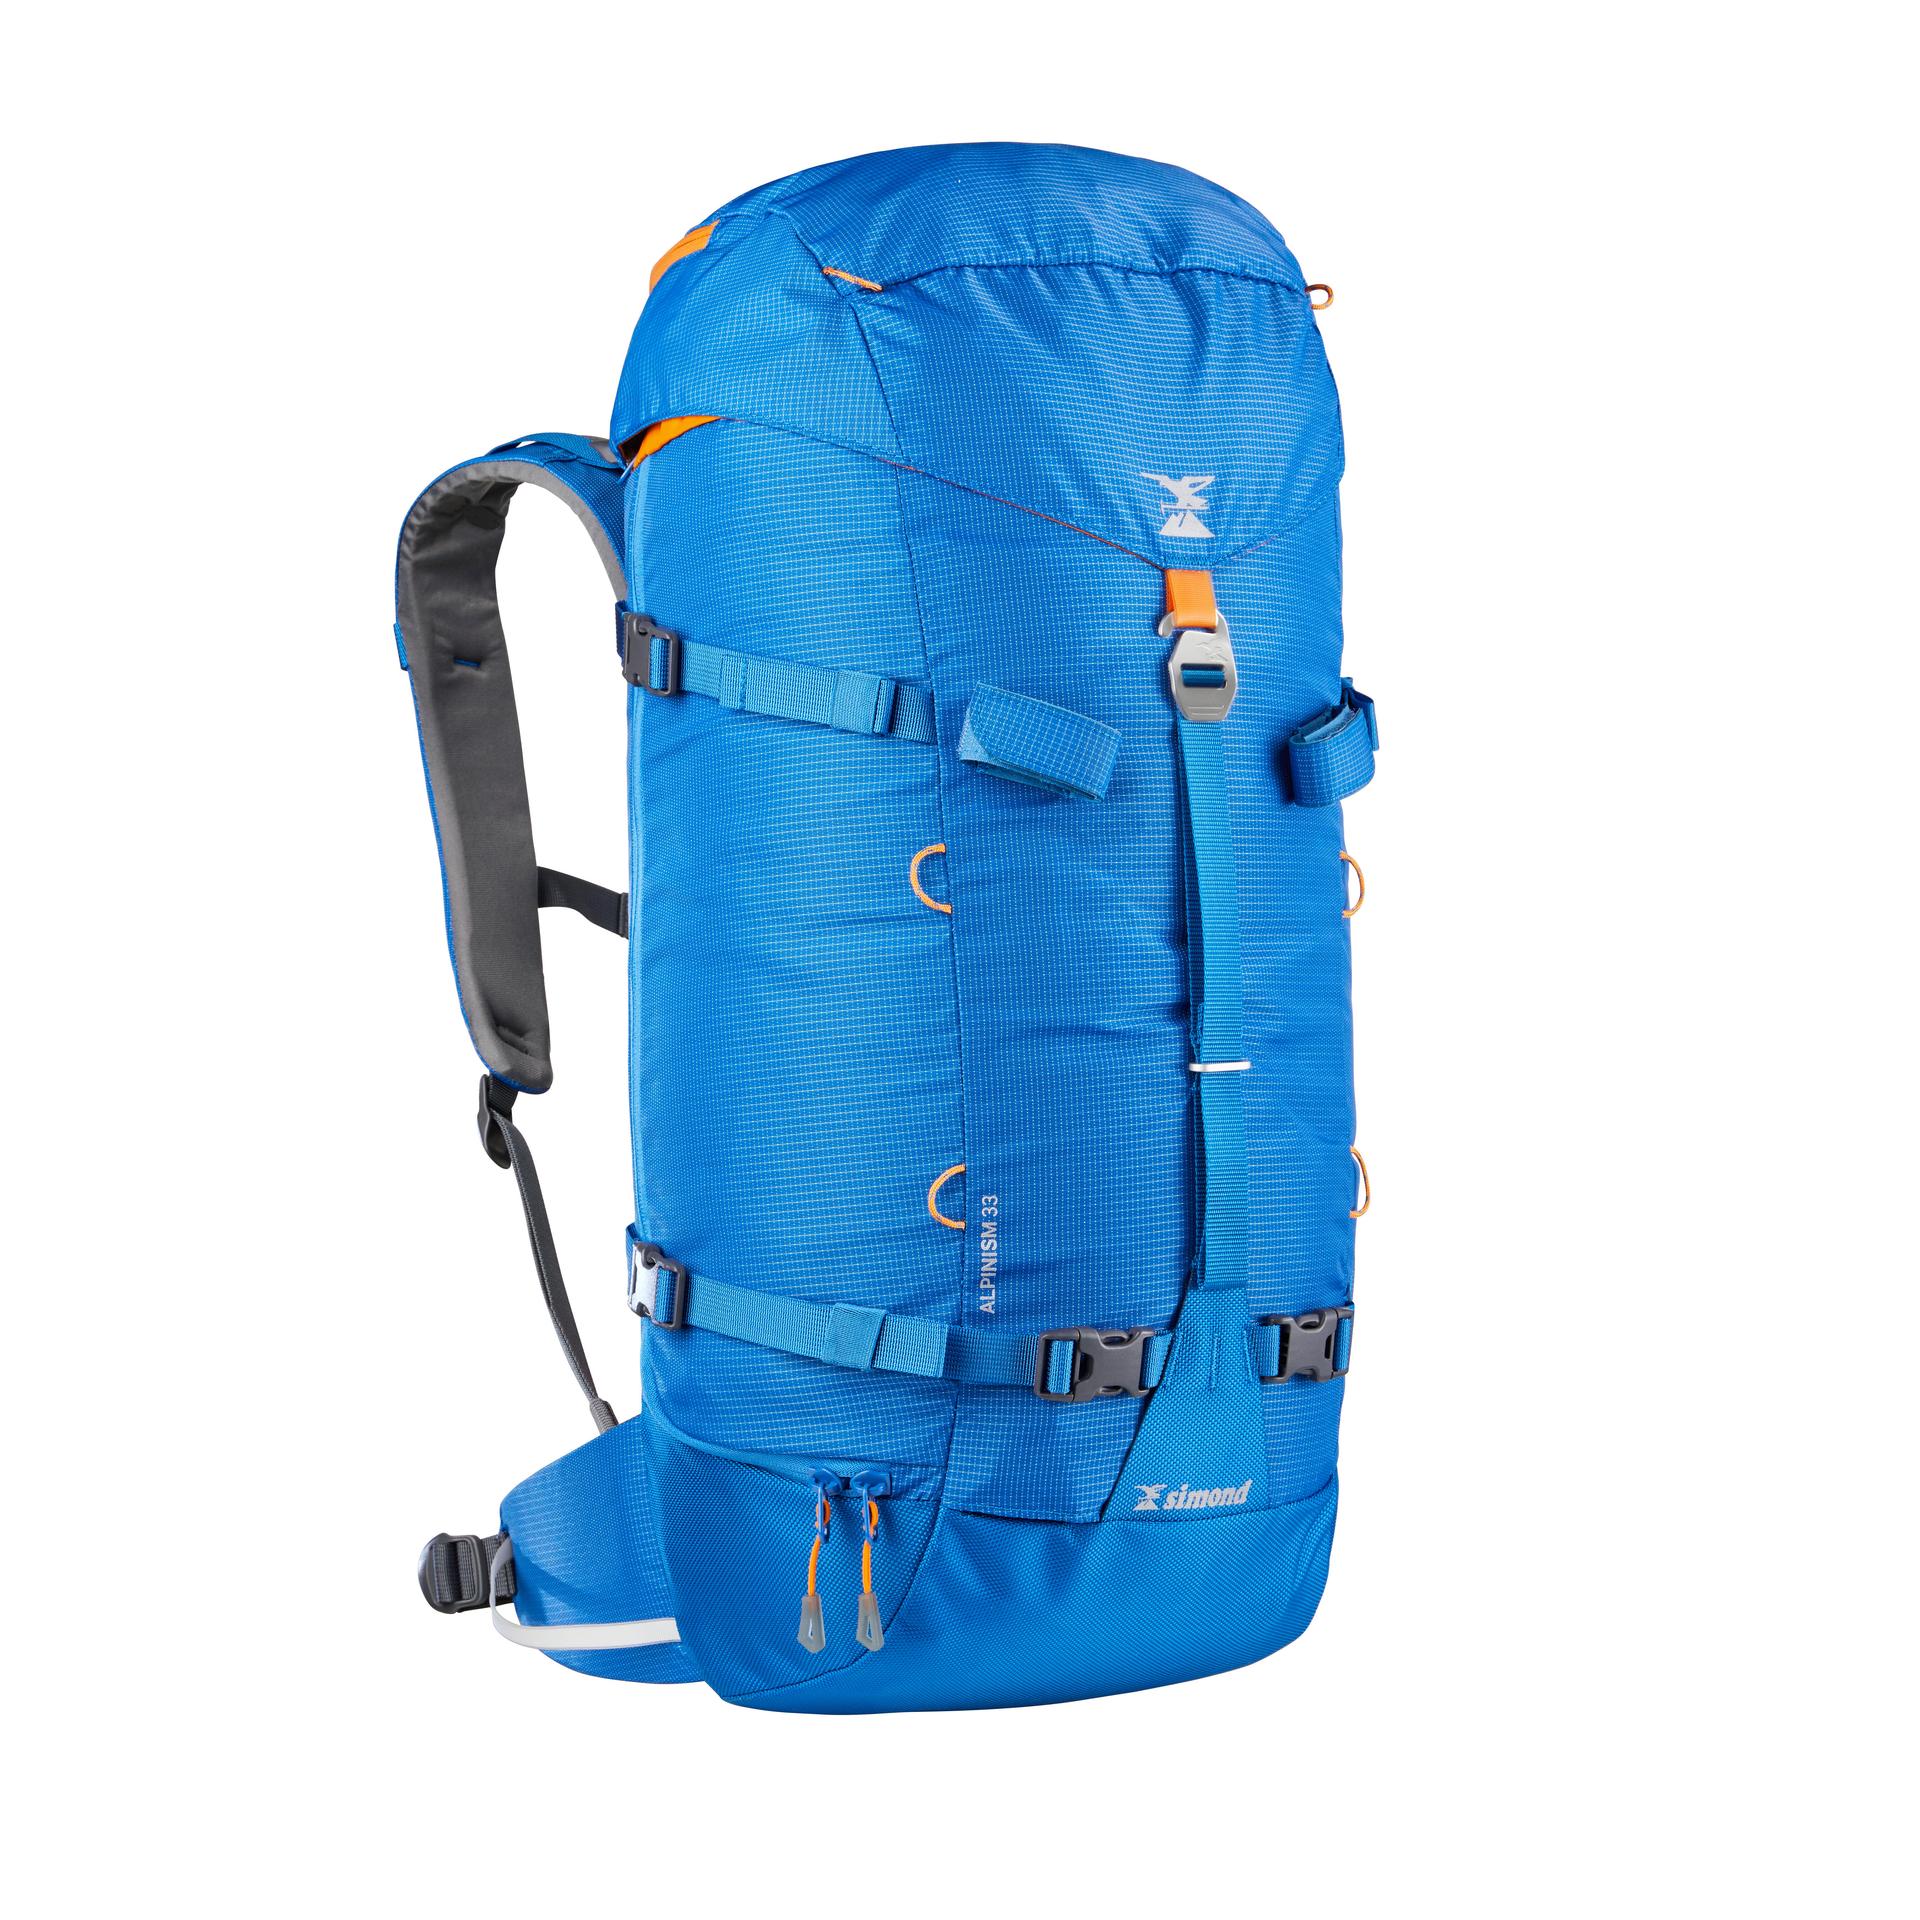 mountaineering-backpack-33-litres---alpinism-33-blue